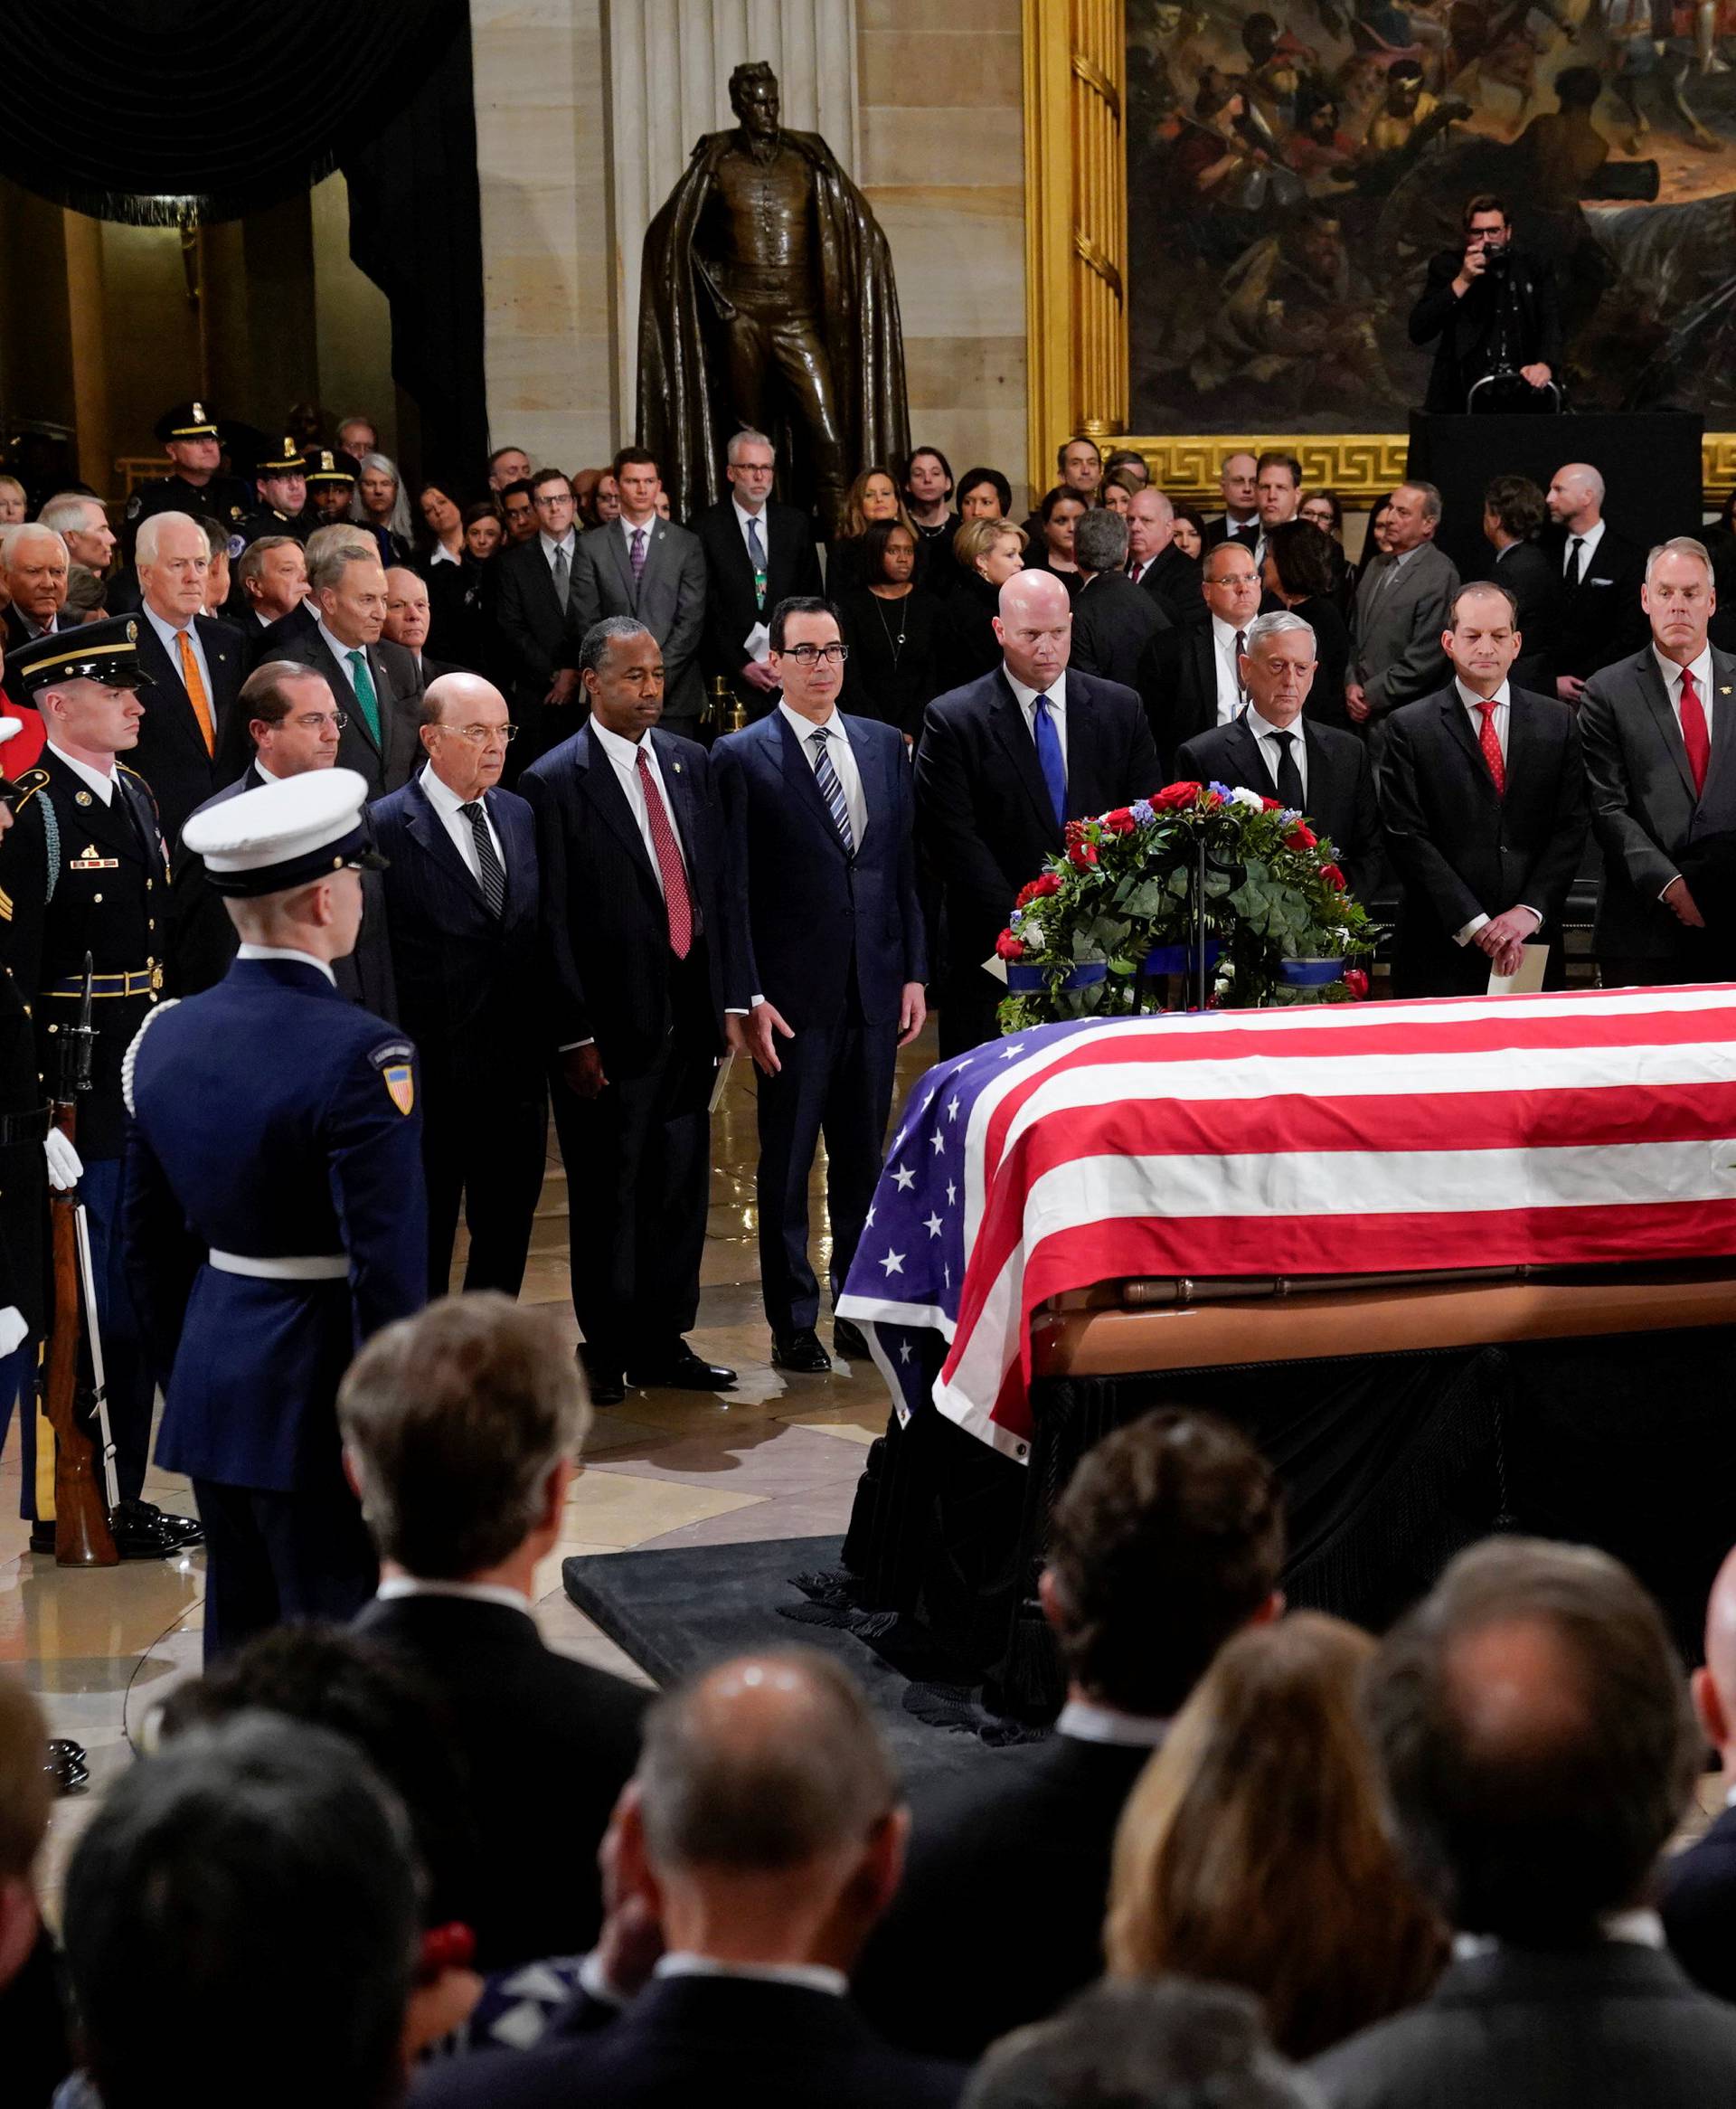 Members of President Donald Trump's cabinet stop to pay their respect in front of the flag-draped casket of former President George H.W. Bush at the Capitol in Washington